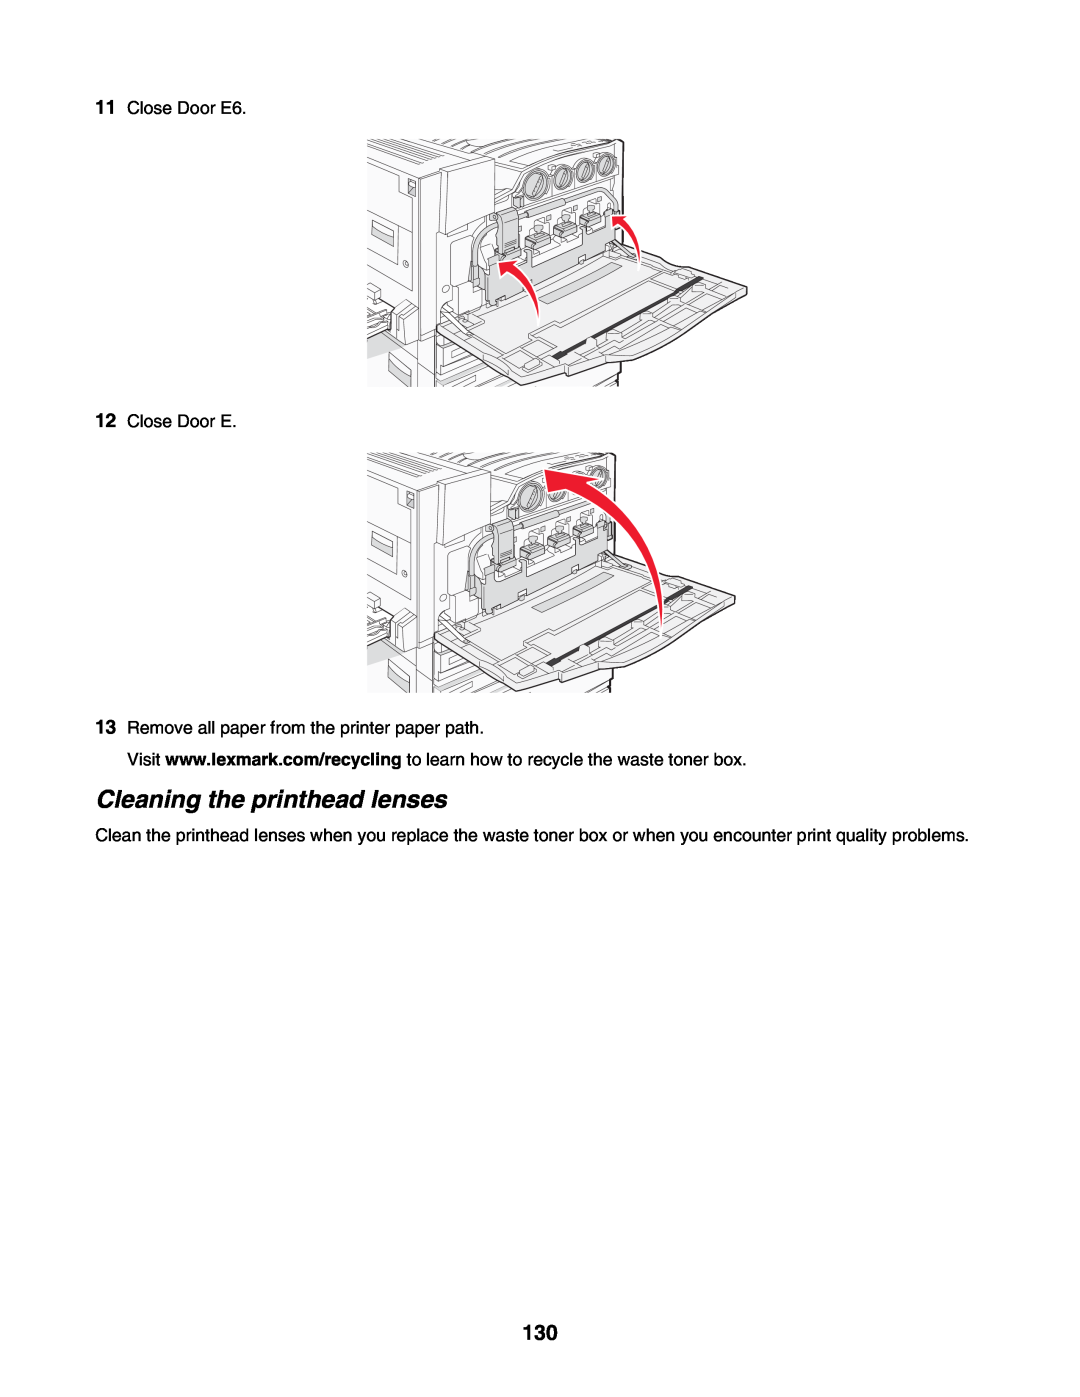 Lexmark C935 Cleaning the printhead lenses, Close Door E6 12 Close Door E, Remove all paper from the printer paper path 